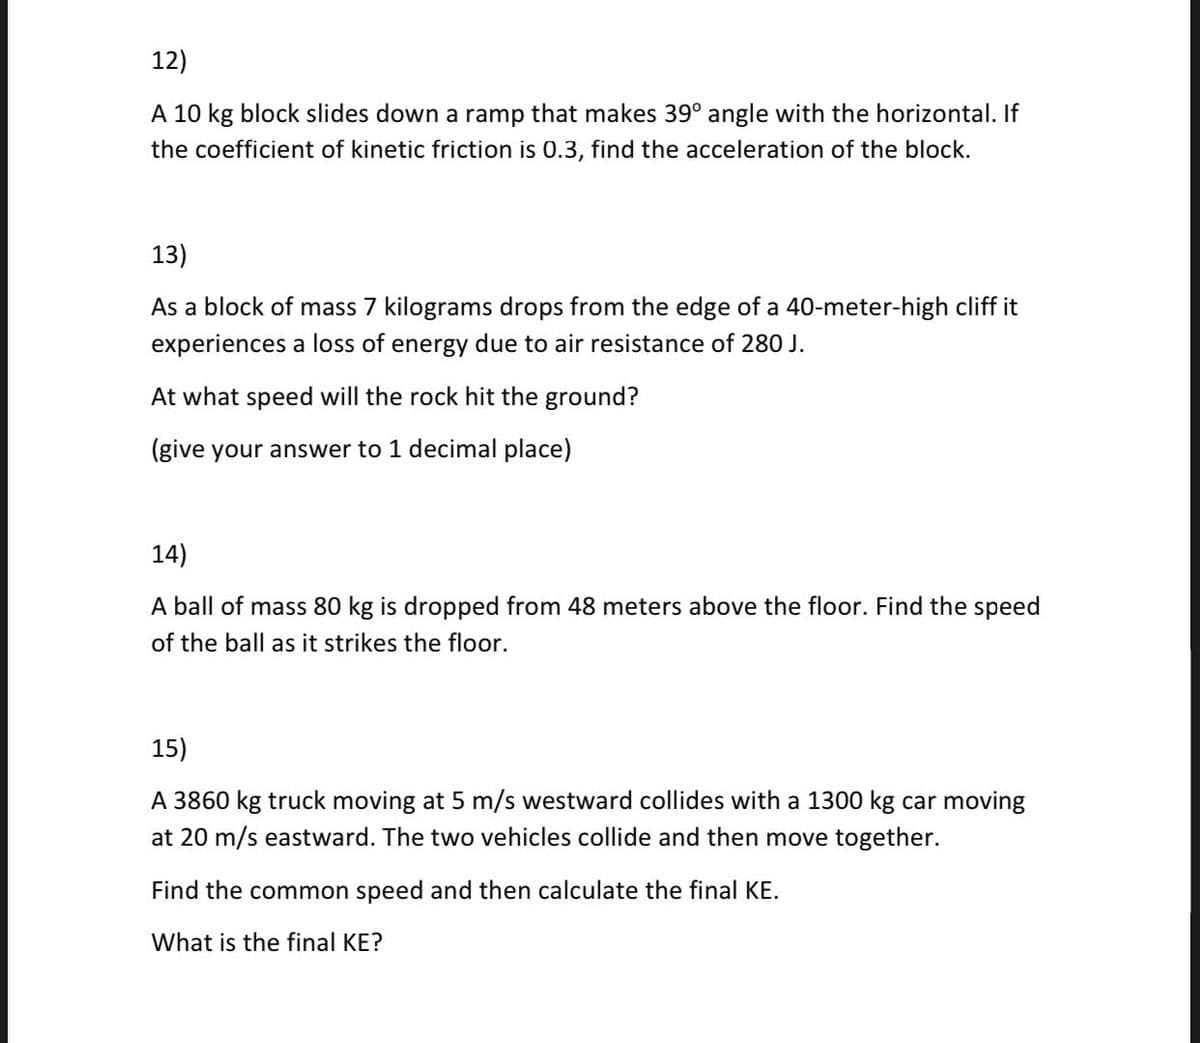 12)
A 10 kg block slides down a ramp that makes 39° angle with the horizontal. If
the coefficient of kinetic friction is 0.3, find the acceleration of the block.
13)
As a block of mass 7 kilograms drops from the edge of a 40-meter-high cliff it
experiences a loss of energy due to air resistance of 280 J.
At what speed will the rock hit the ground?
(give your answer to 1 decimal place)
14)
A ball of mass 80 kg is dropped from 48 meters above the floor. Find the speed
of the ball as it strikes the floor.
15)
A 3860 kg truck moving at 5 m/s westward collides with a 1300 kg car moving
at 20 m/s eastward. The two vehicles collide and then move together.
Find the common speed and then calculate the final KE.
What is the final KE?
